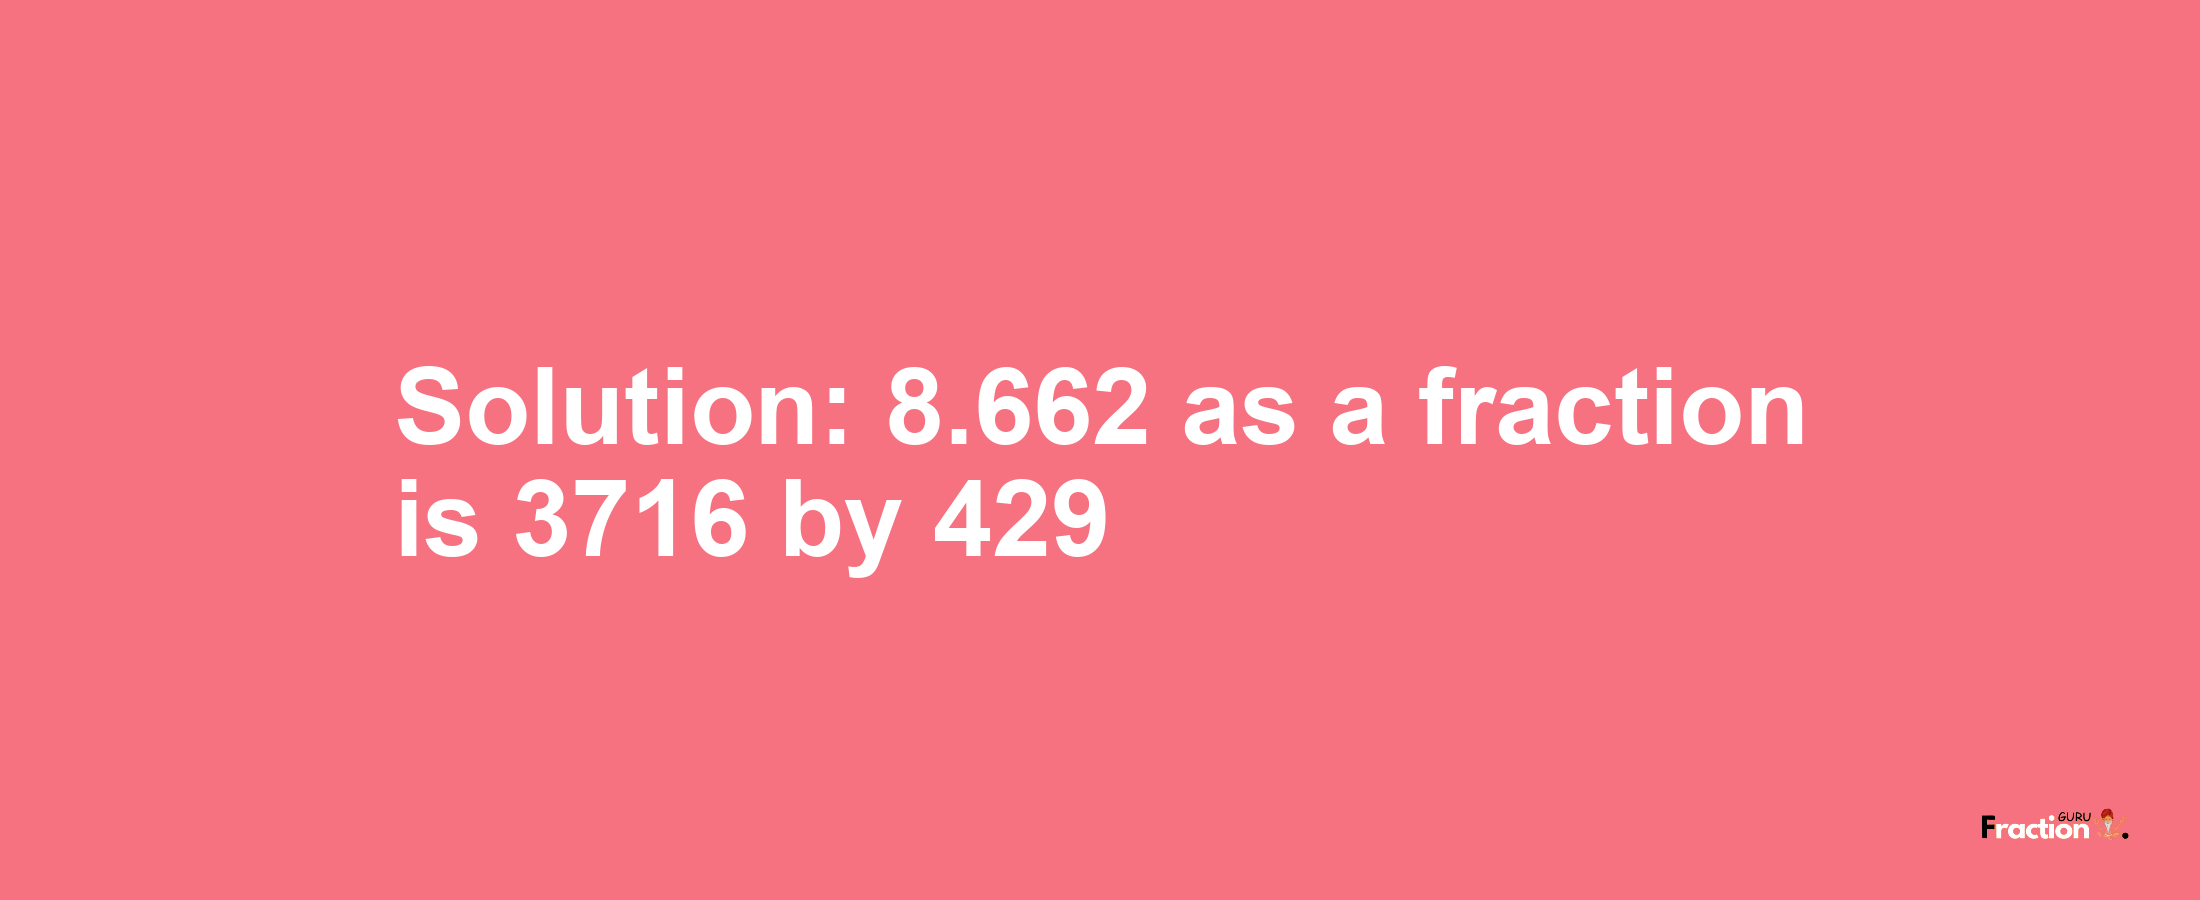 Solution:8.662 as a fraction is 3716/429